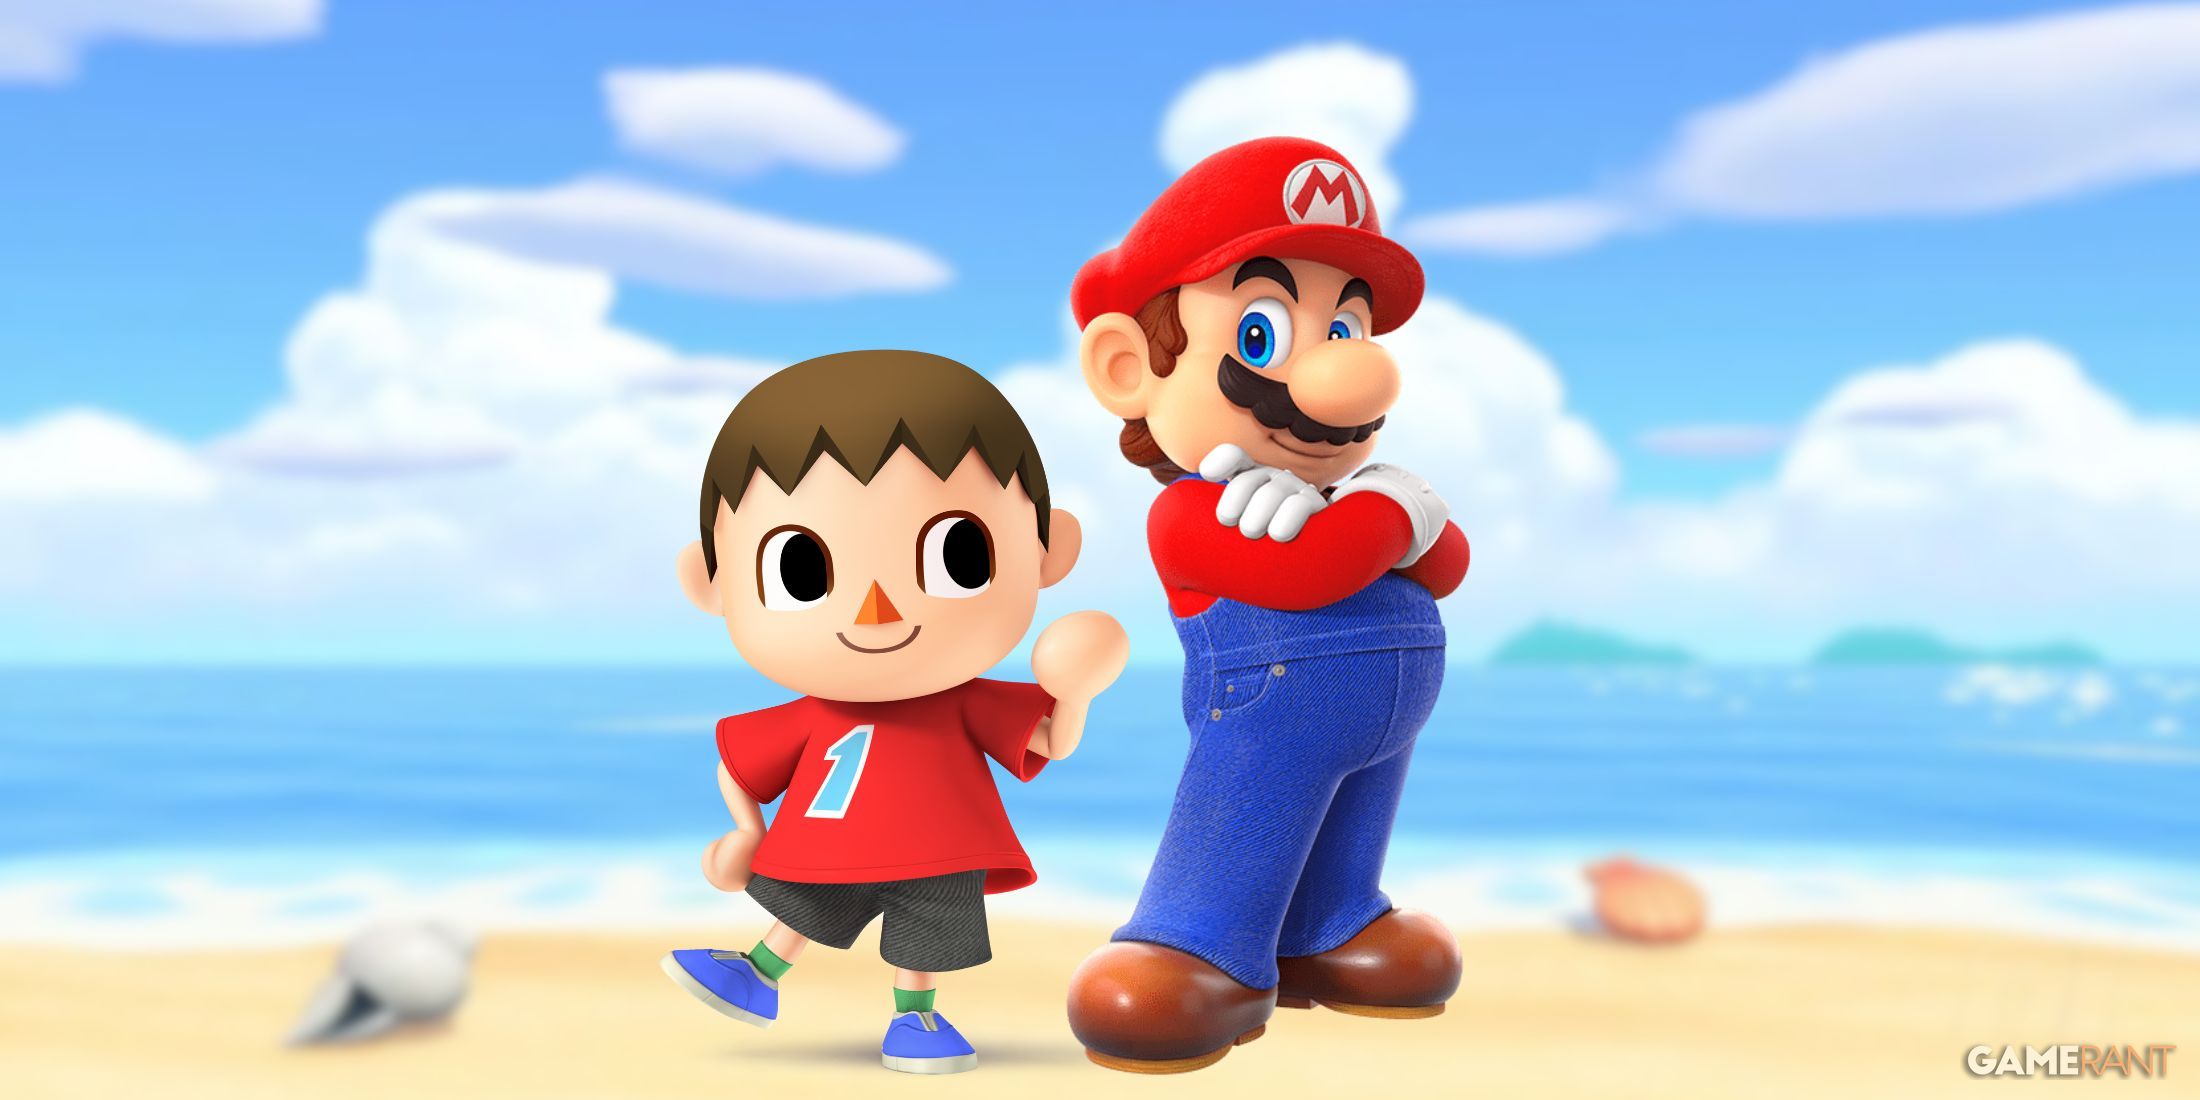 Animal Crossing Mario and Villager